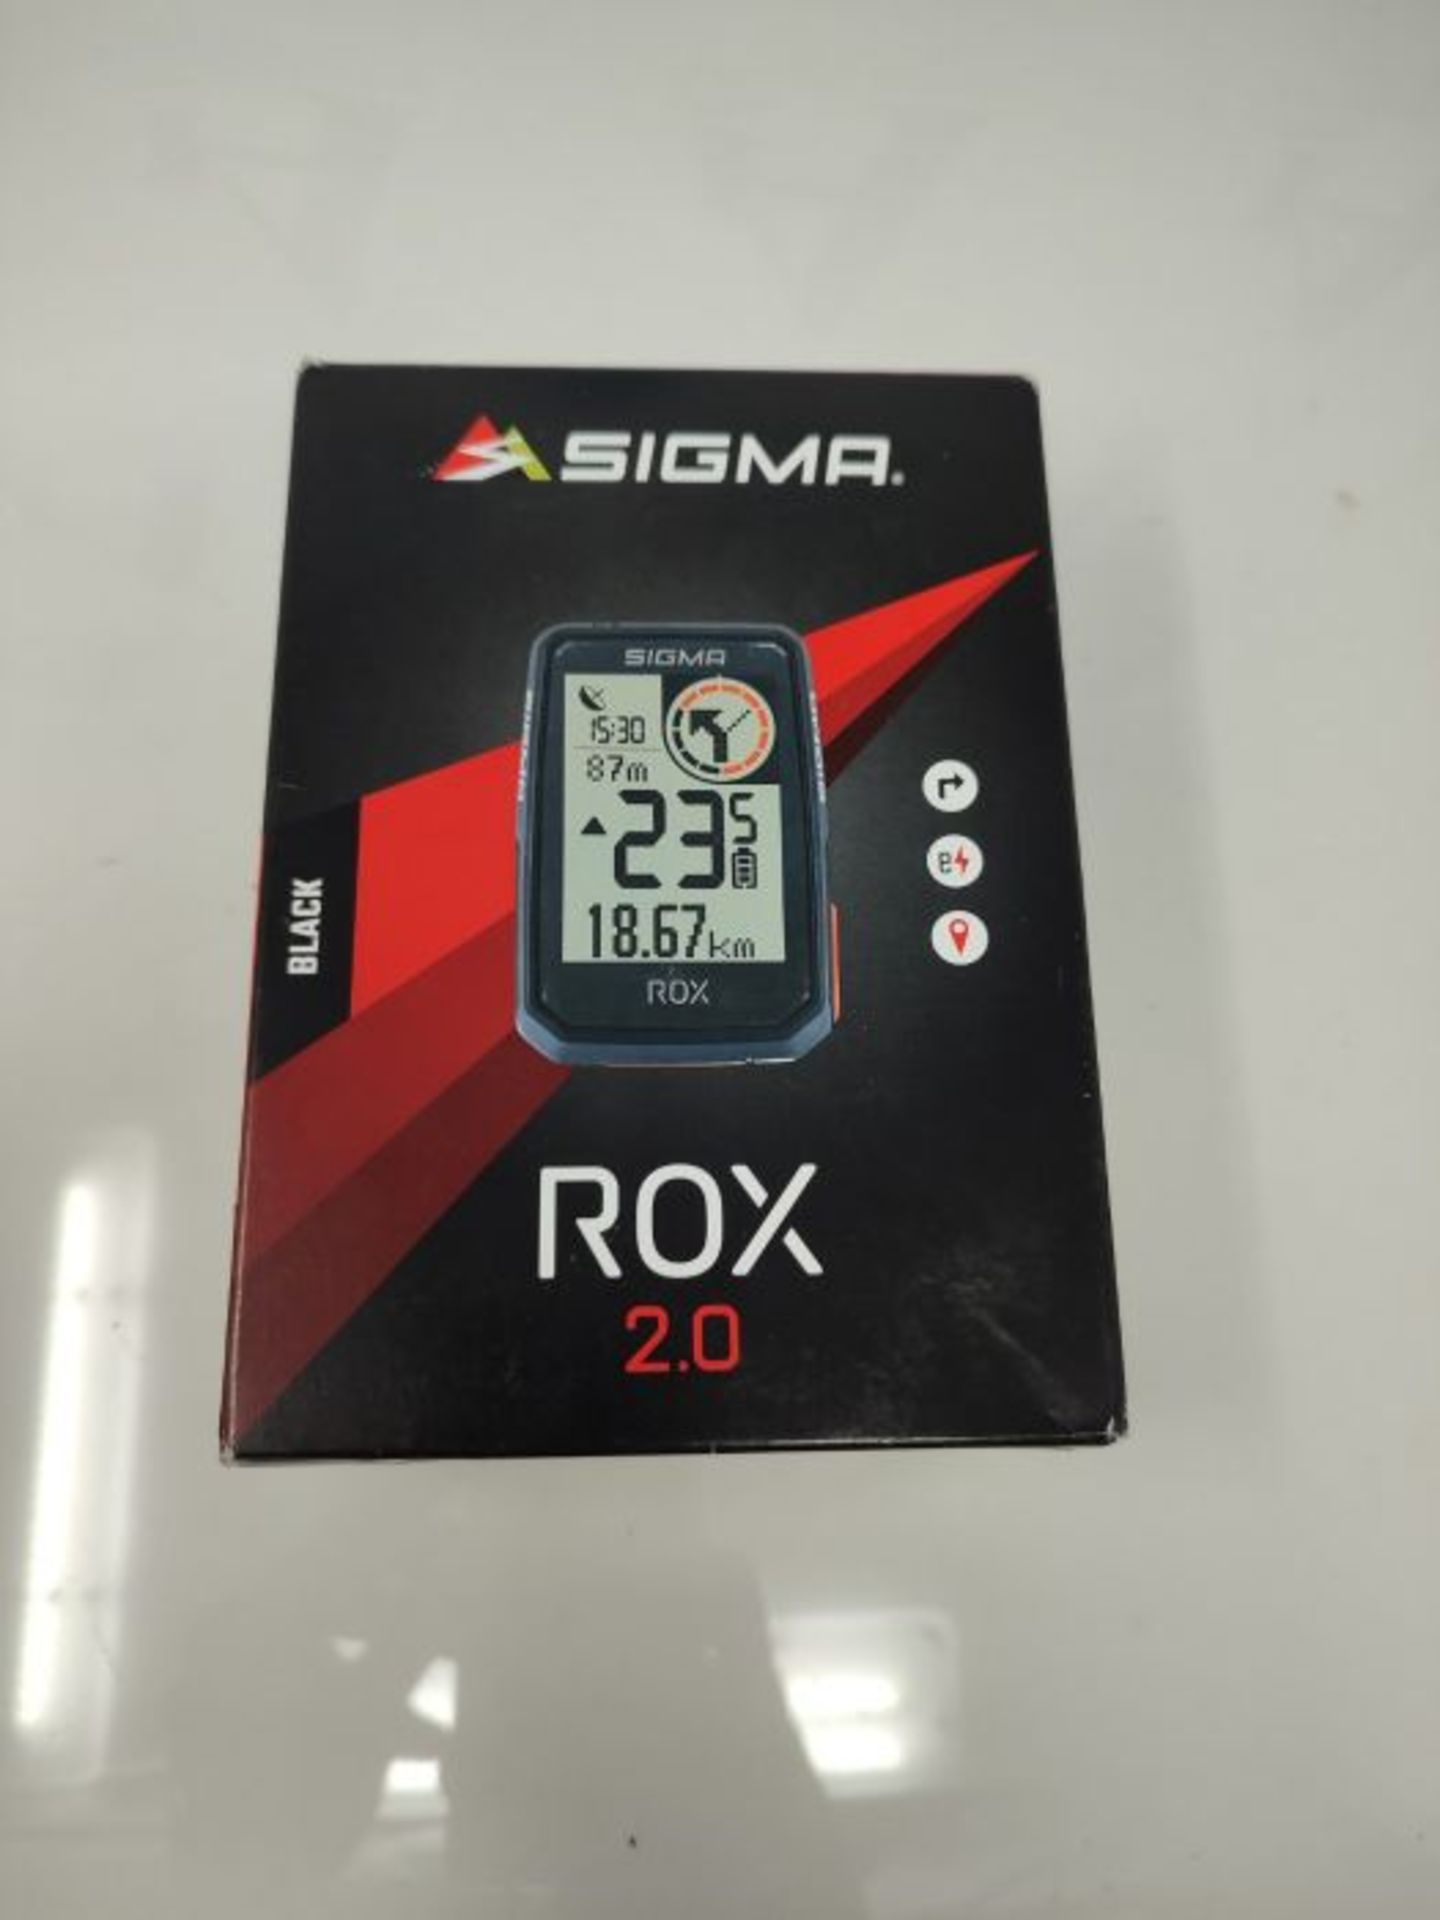 RRP £59.00 Sigma Sport Bicycle Computer, Black, ROX 2.0 - Image 2 of 3